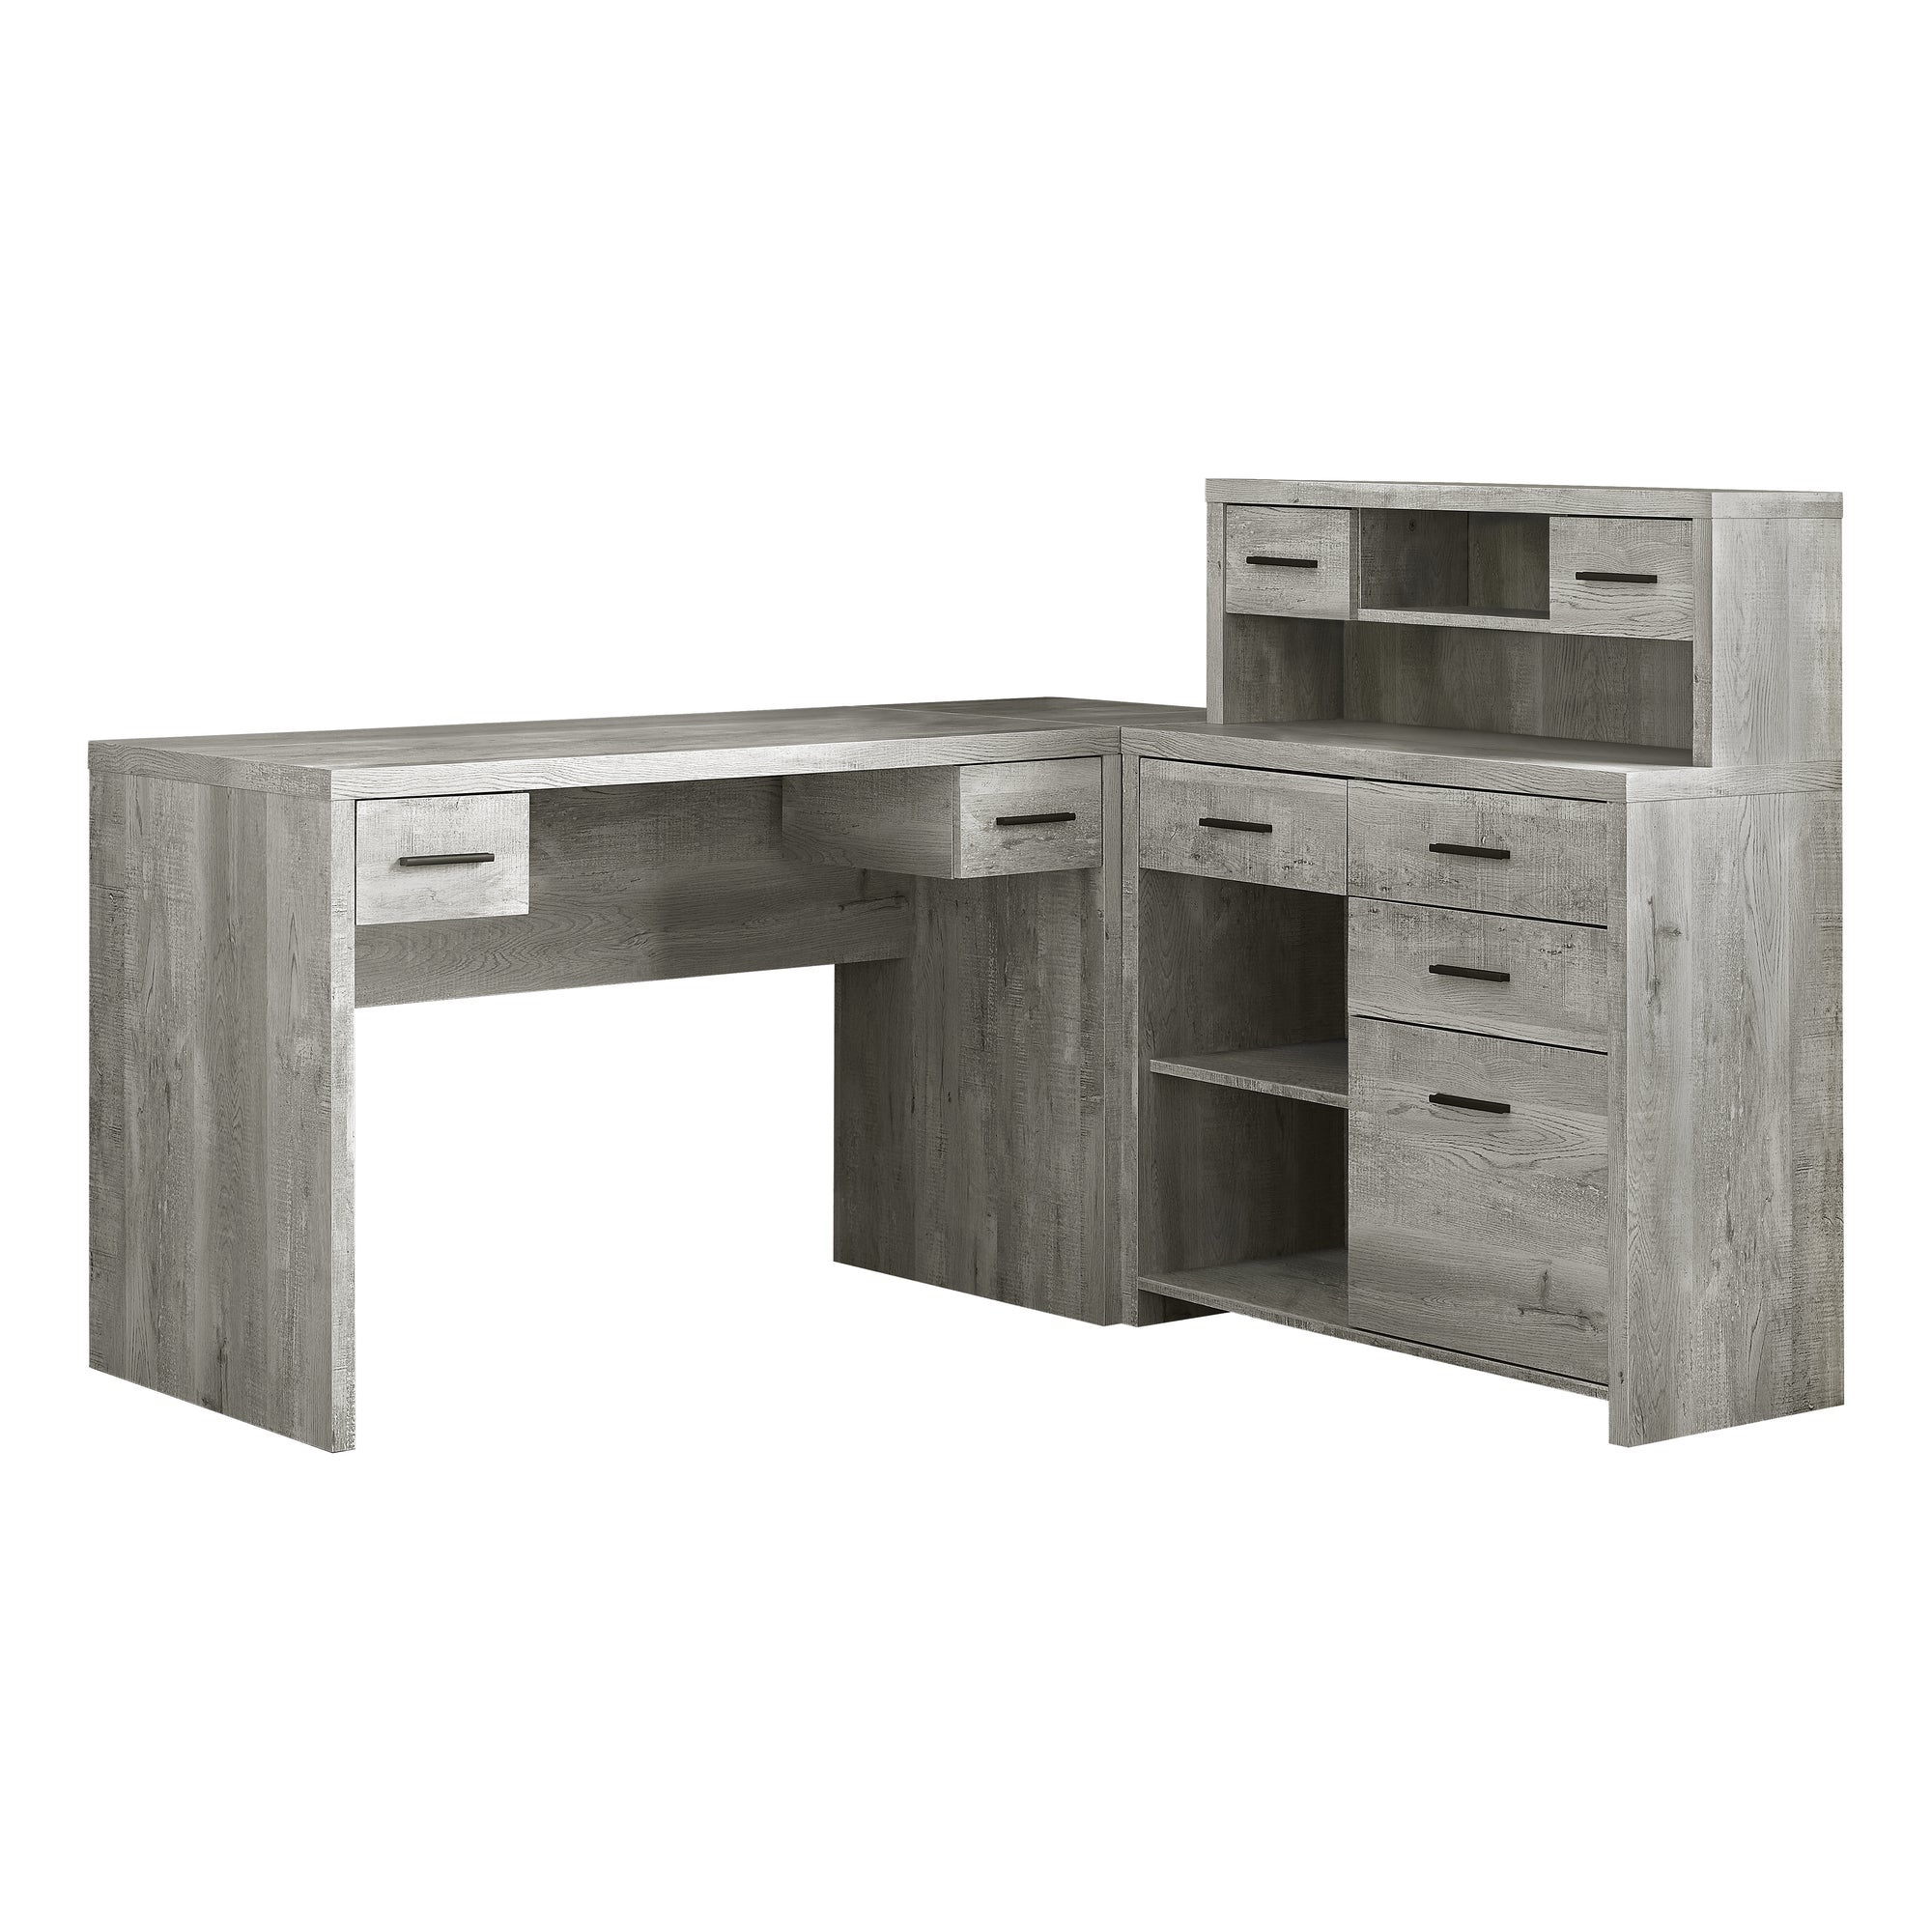 MN-917428    Computer Desk, Home Office, Corner, Left, Right Set-Up, Storage Drawers, L Shape, Laminate, Grey Reclaimed Wood Look, Black, Contemporary, Modern